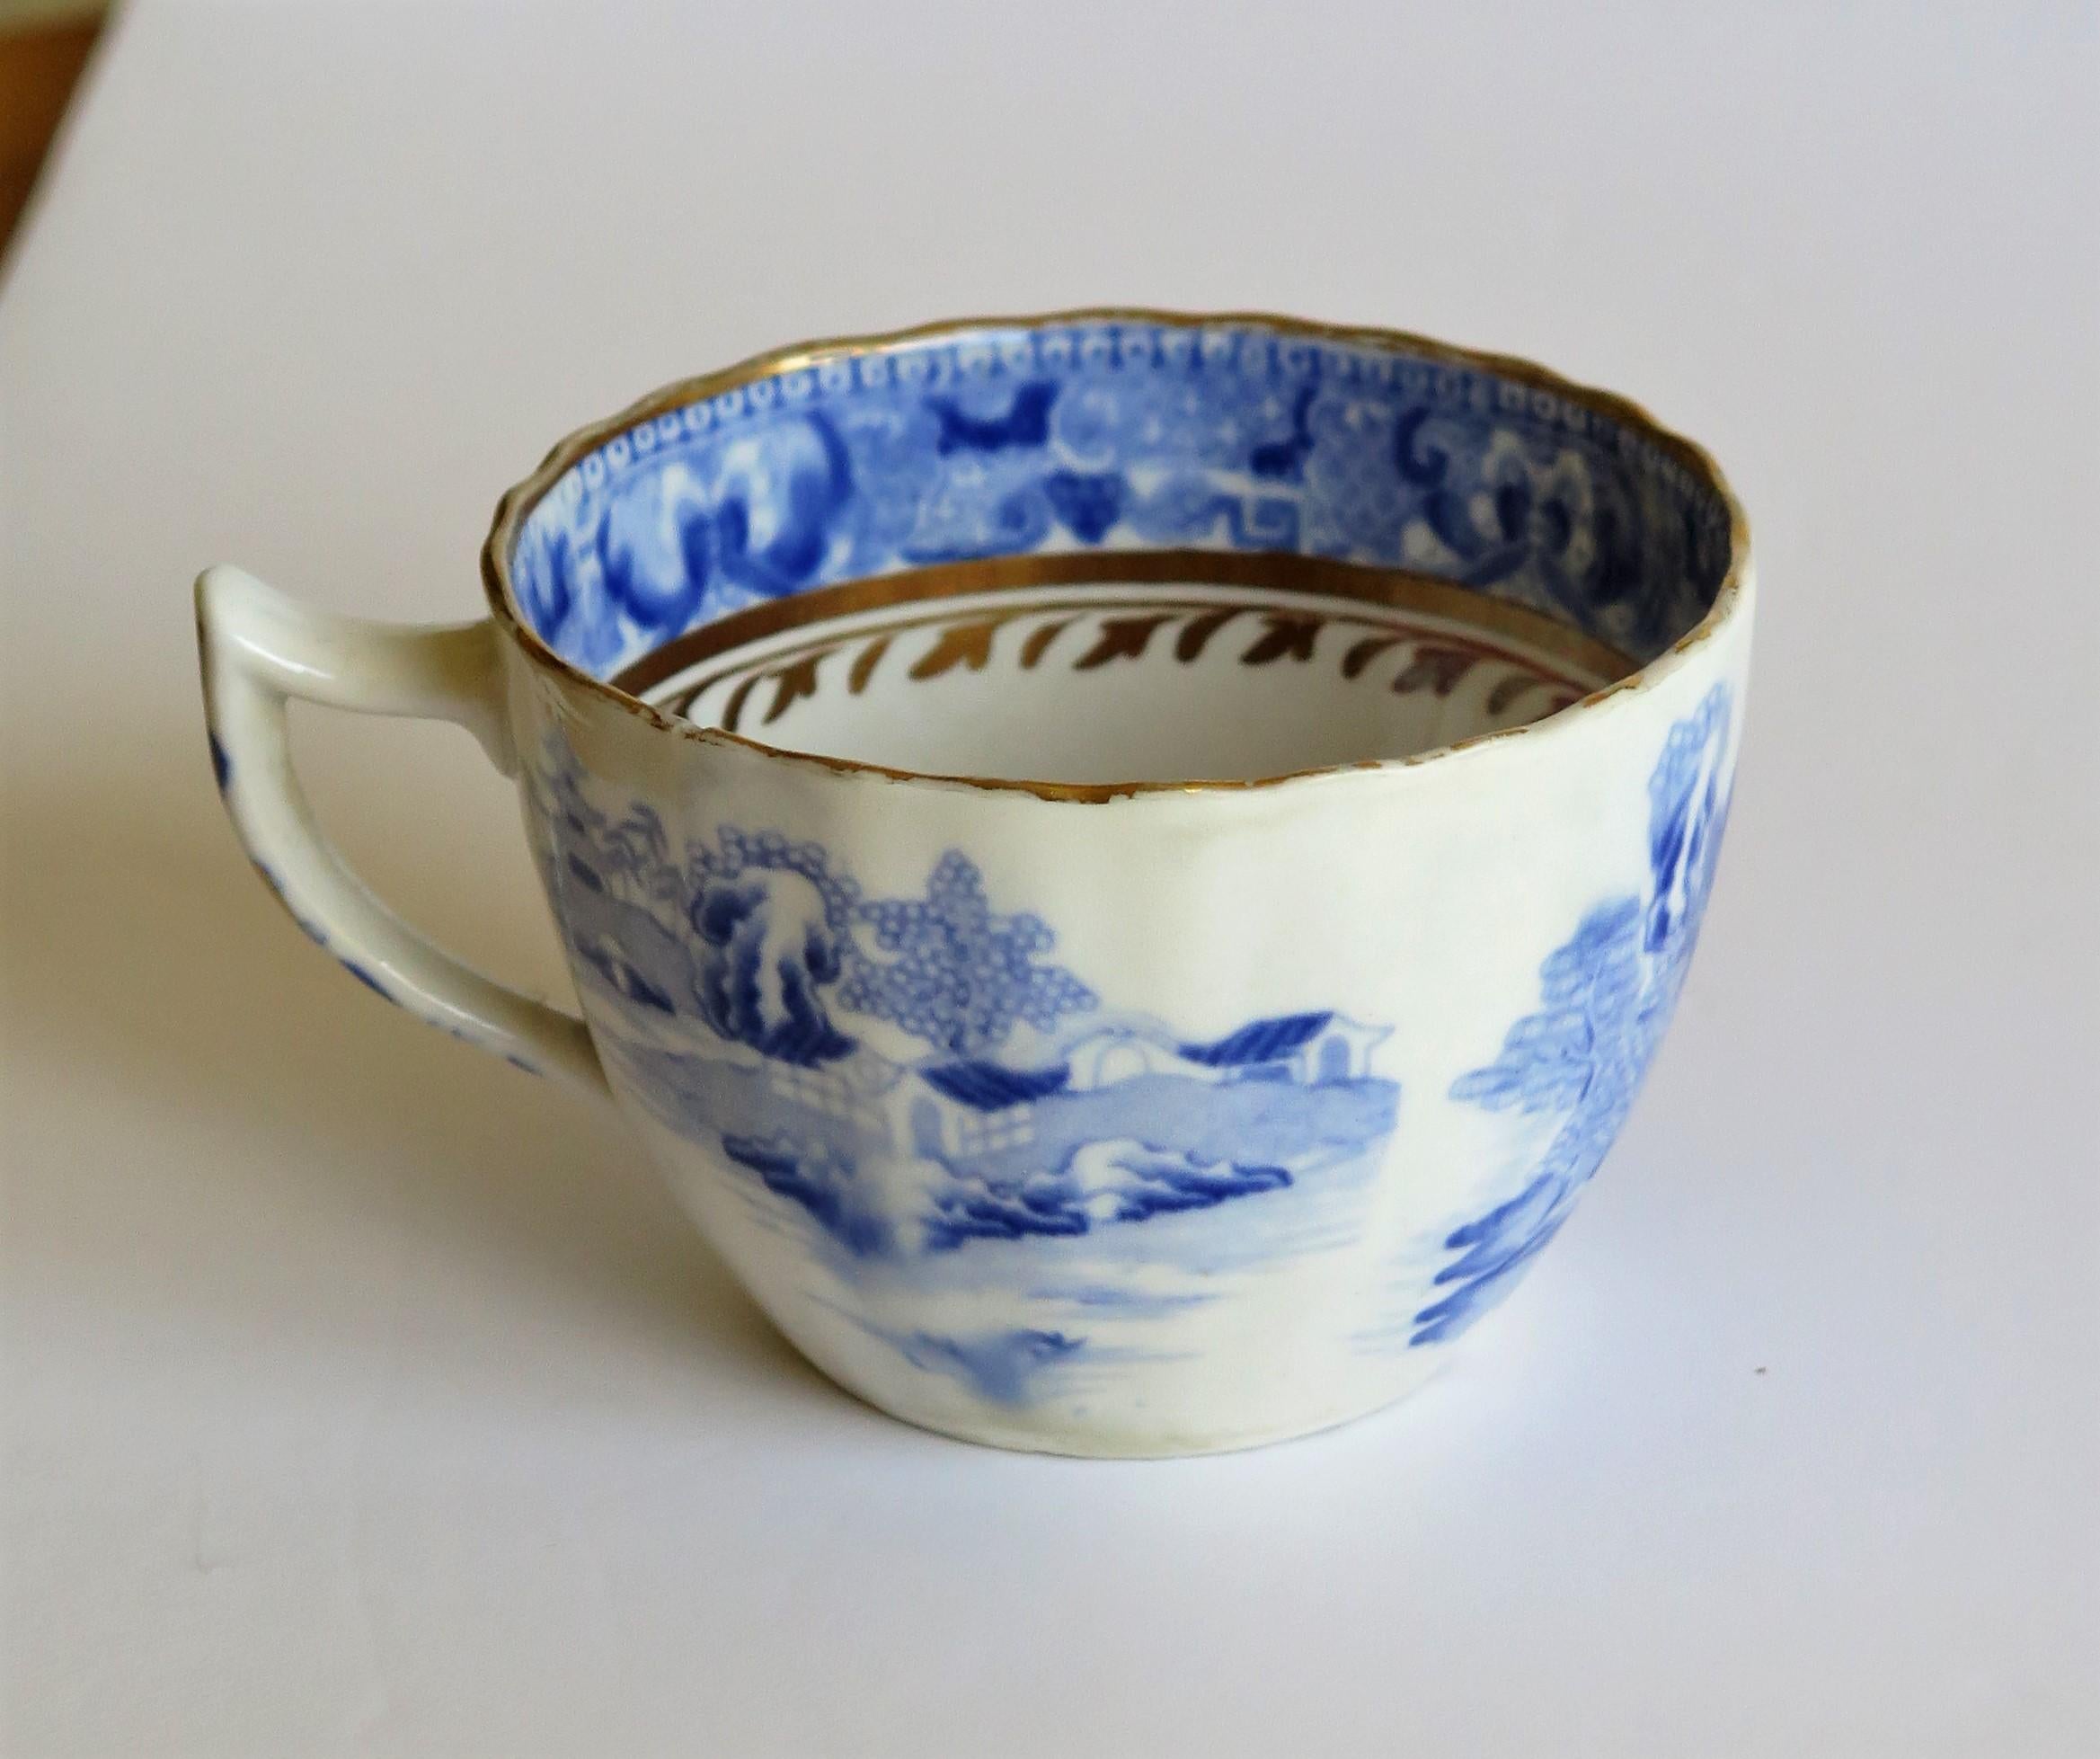 Miles Mason Porcelain Pair of Tea Cups Broseley Blue and White Pattern, Ca. 1805 In Good Condition For Sale In Lincoln, Lincolnshire